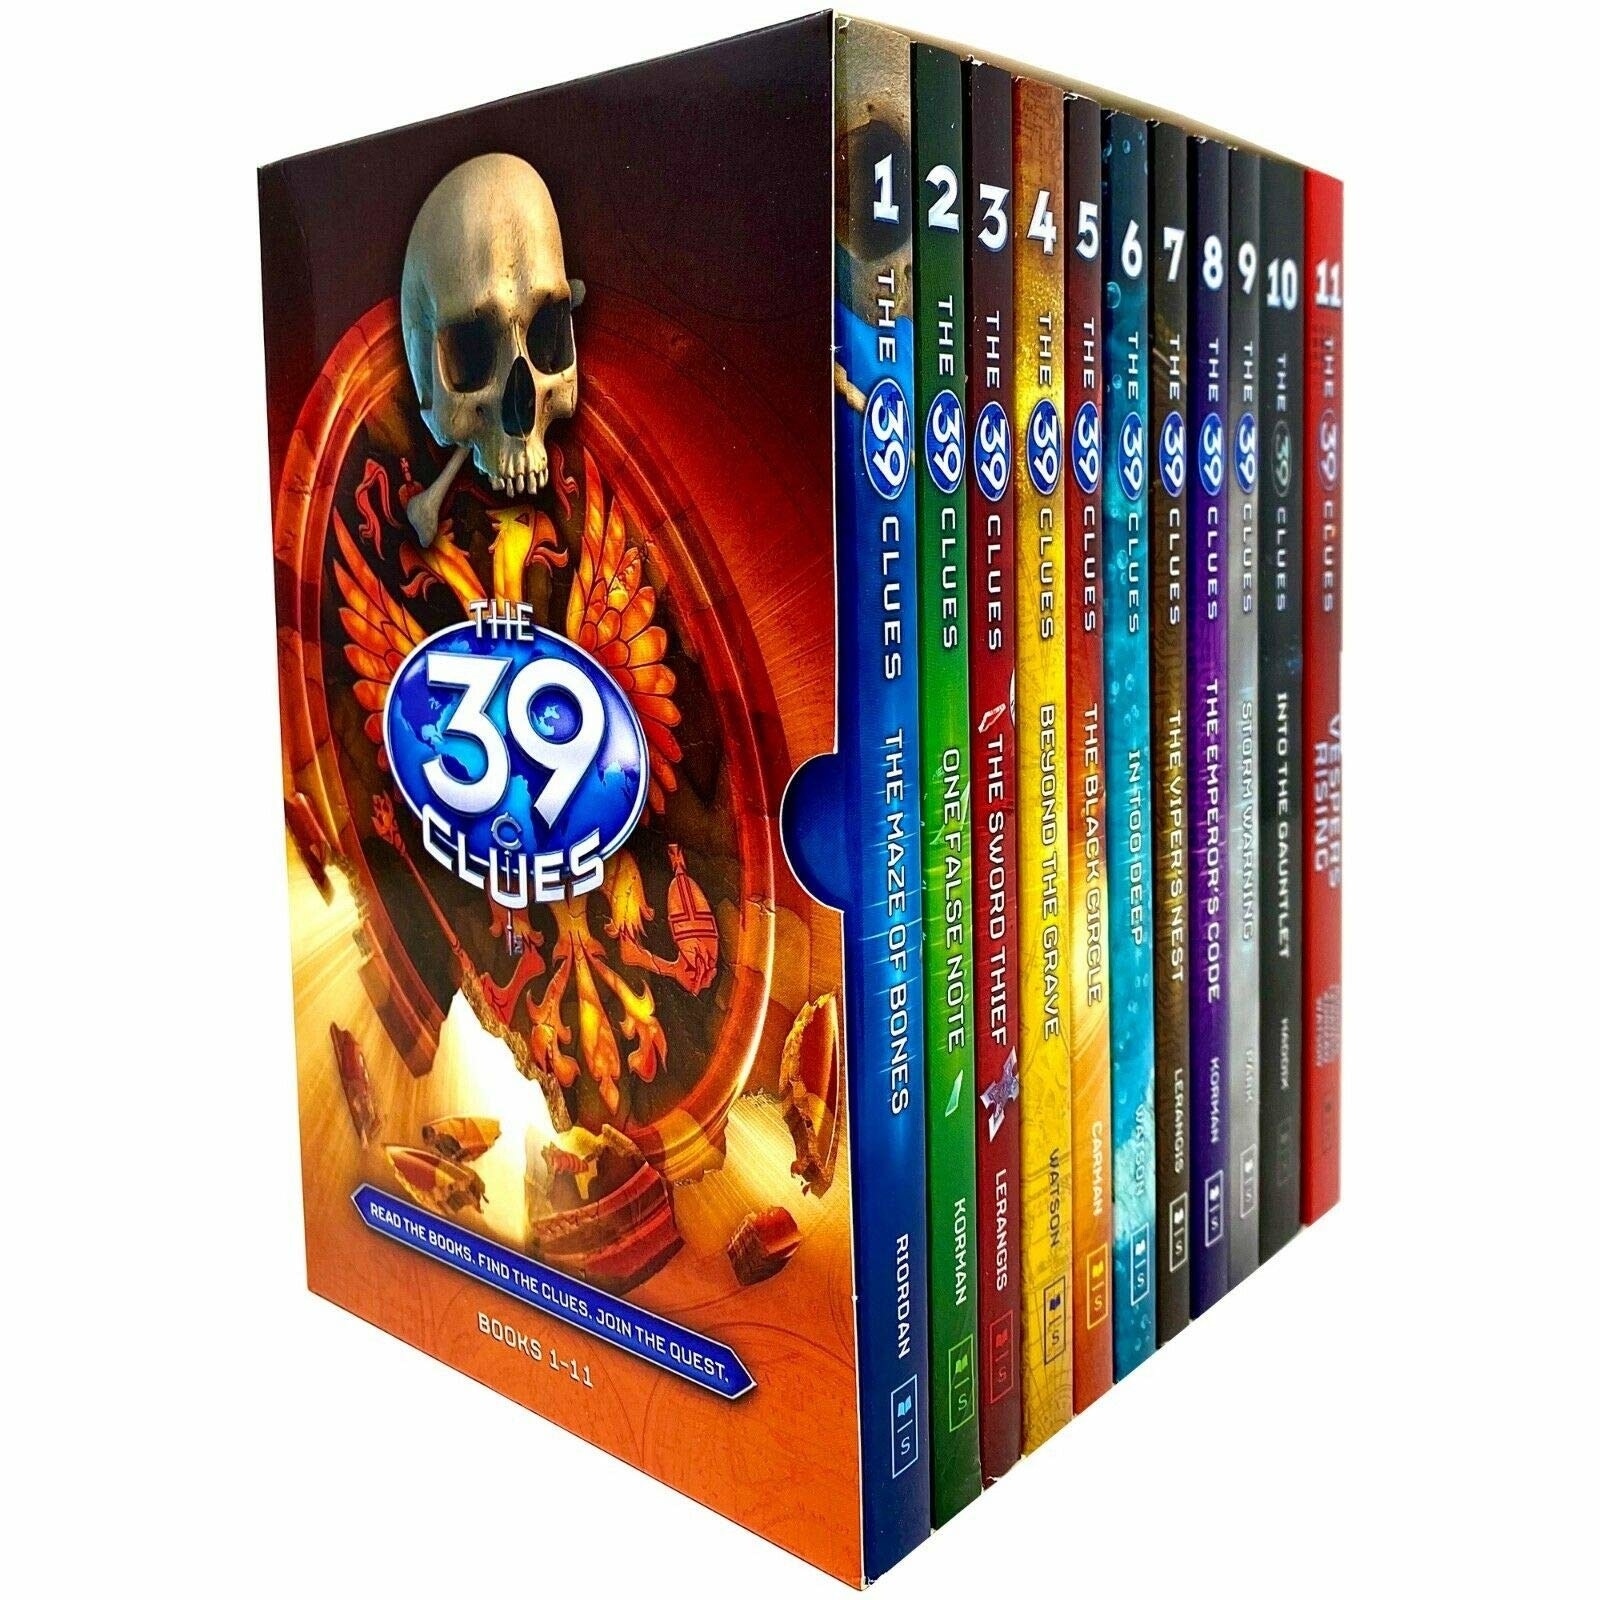 Box set of 39 Clues series with colorful spines on display. Front image is a skull and other orange objects